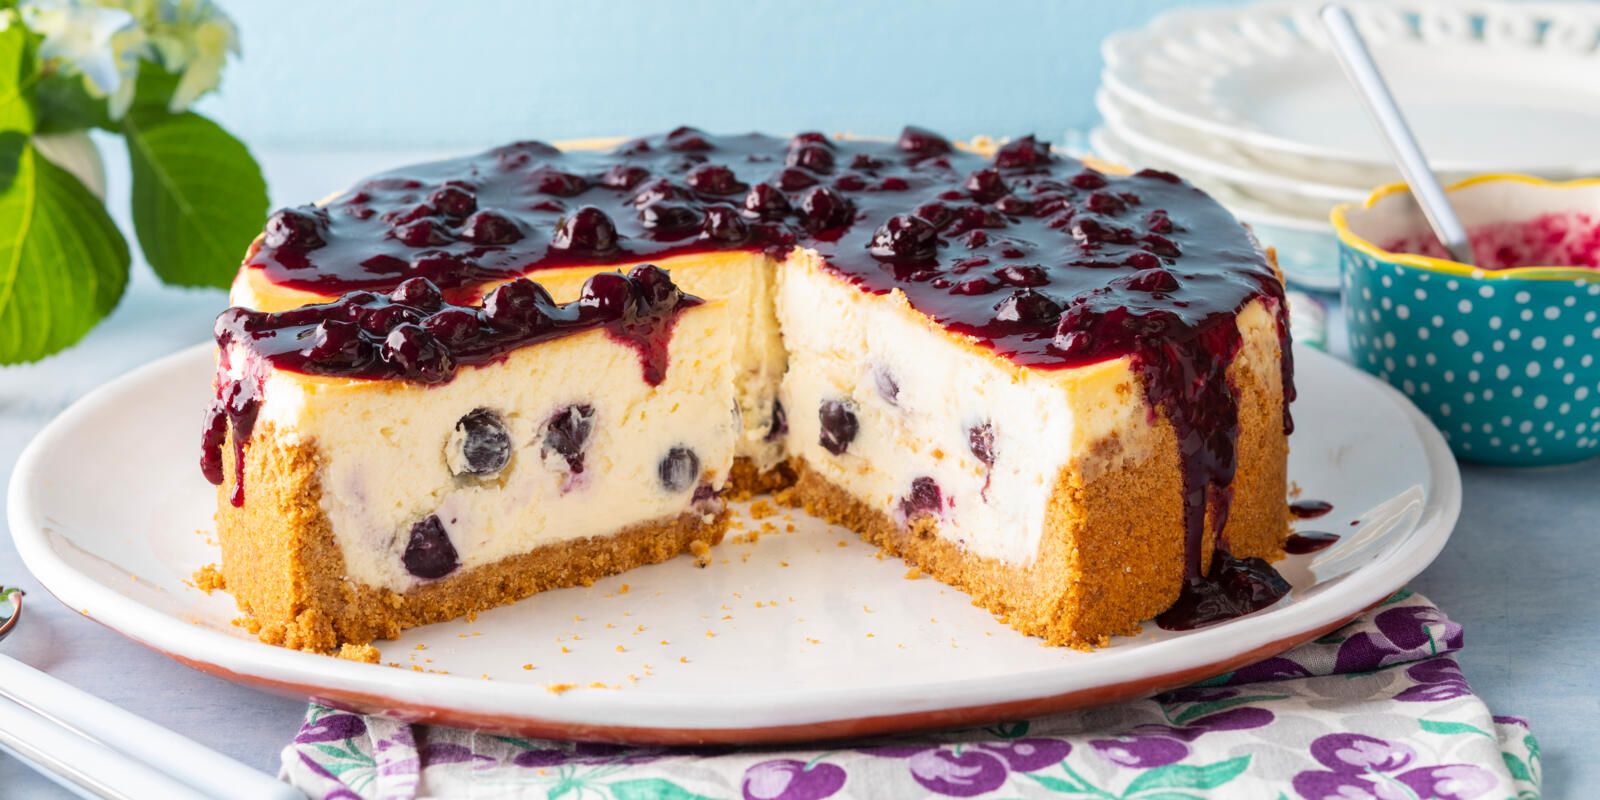 Perfect Blueberry Cheesecake - made easier! [VIDEO] - The Recipe Rebel